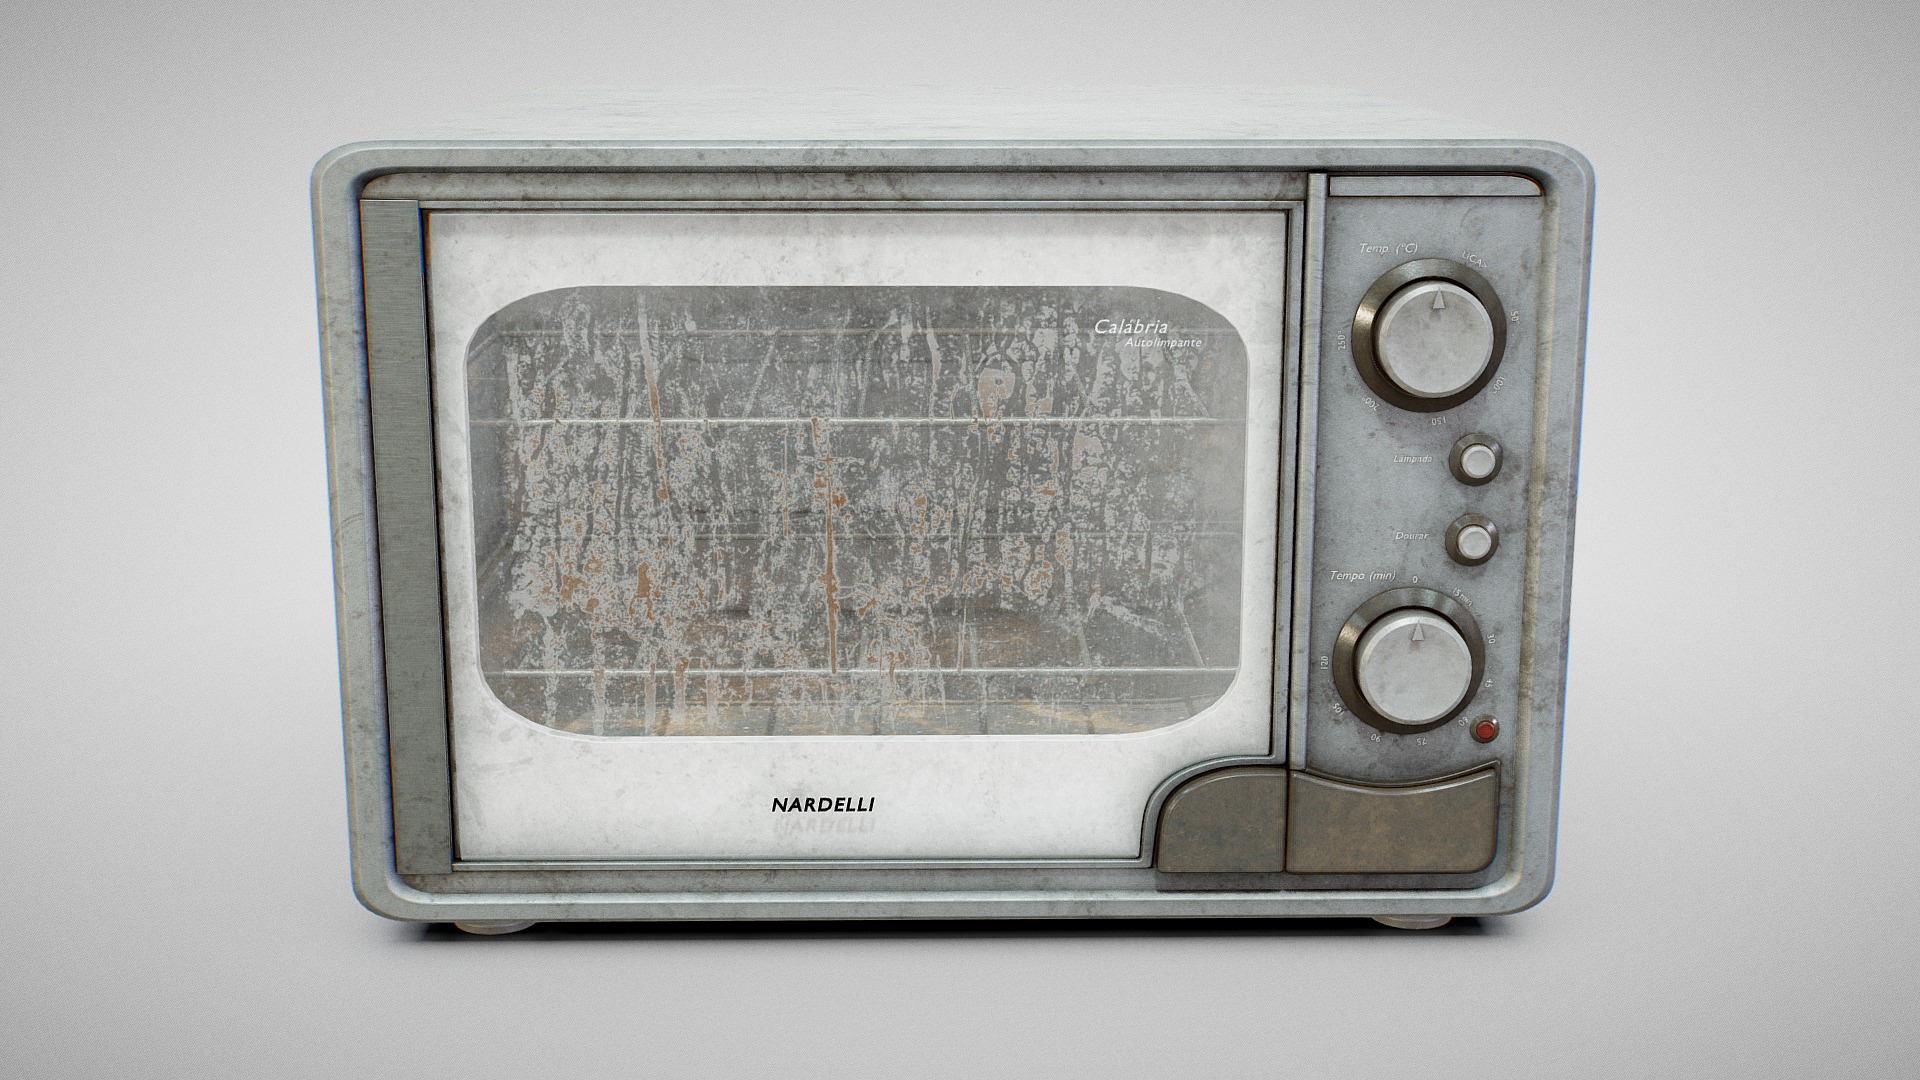 3D model Oven – Nardelli Calabria (Dirty) - This is a 3D model of the Oven - Nardelli Calabria (Dirty). The 3D model is about a silver rectangular object with a black knob.